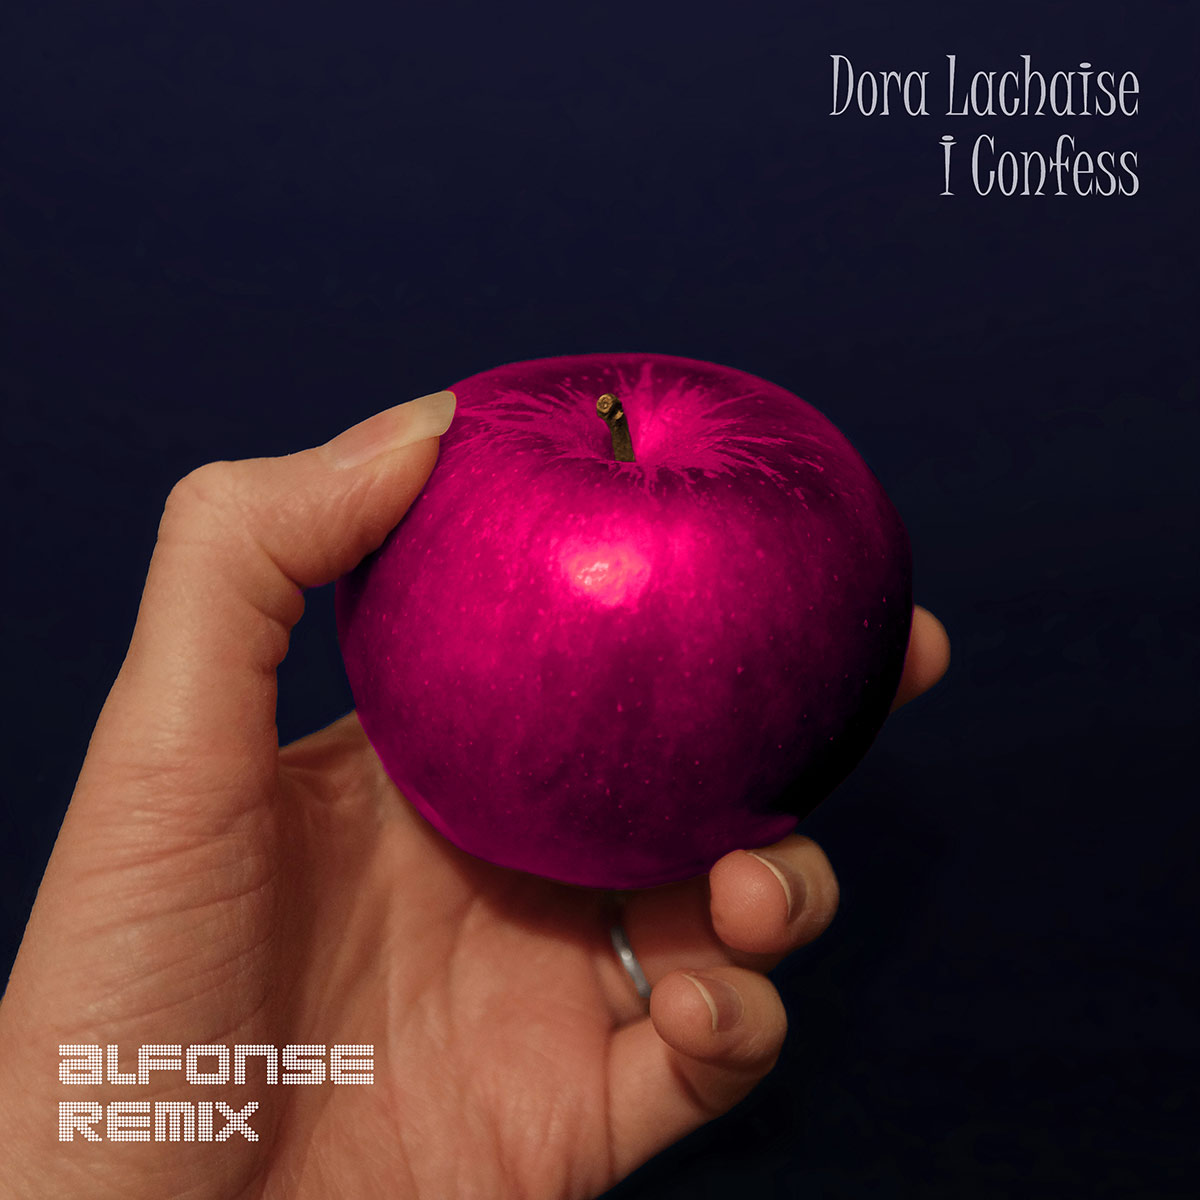 Cover art for Dora's I Confess (Alfonse Remix) track. Photo of a hand holding a metallic pink apple.